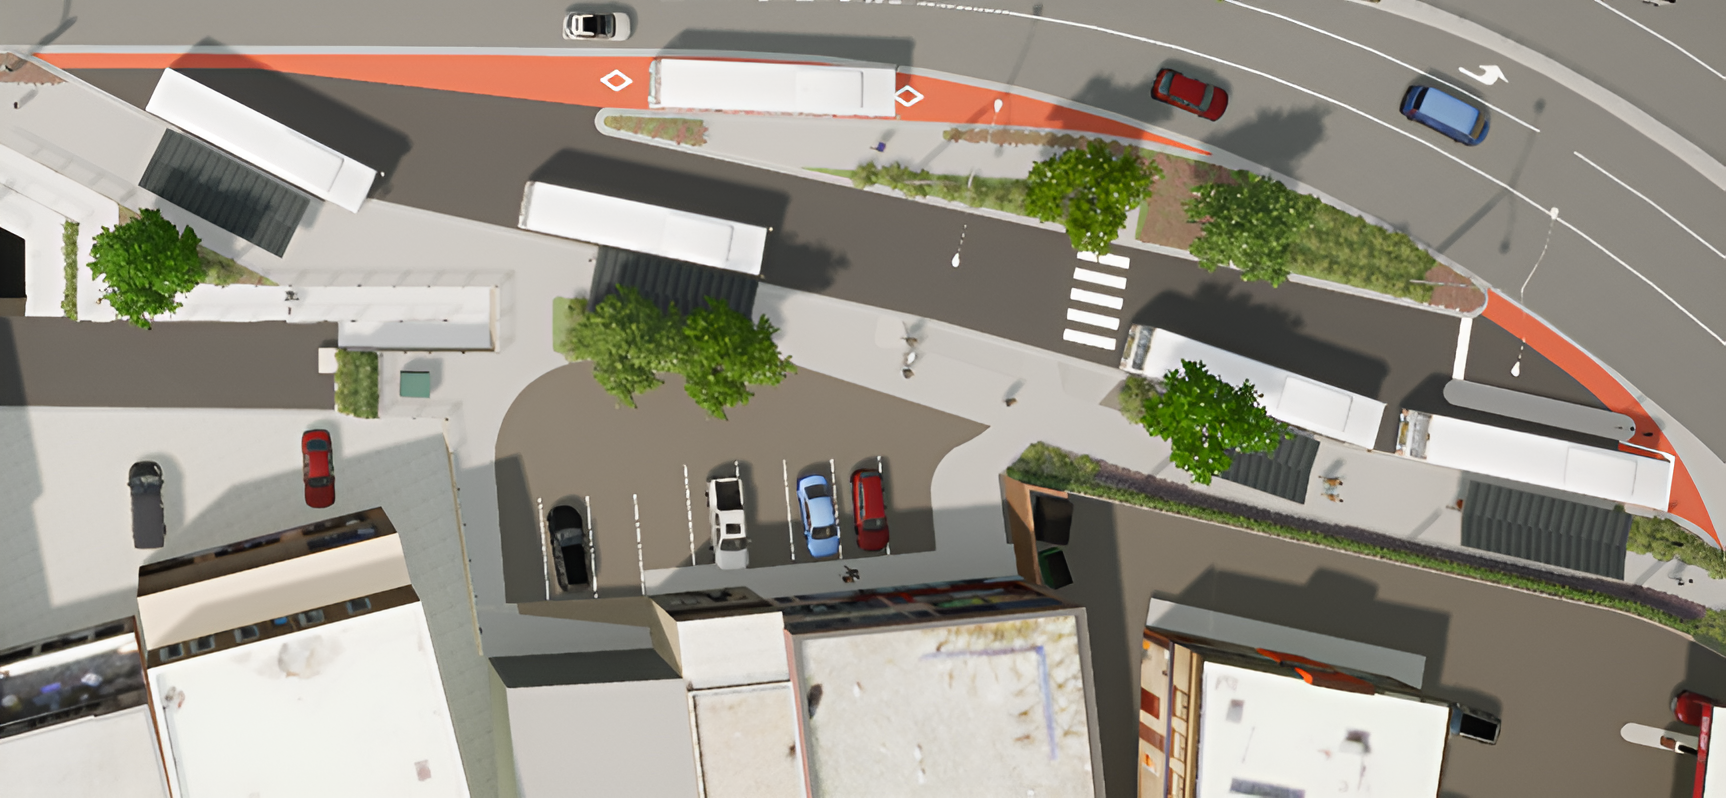 Top-down render of the transit exchange Downtown showing parking, bus pullouts. (City of Nanaimo))